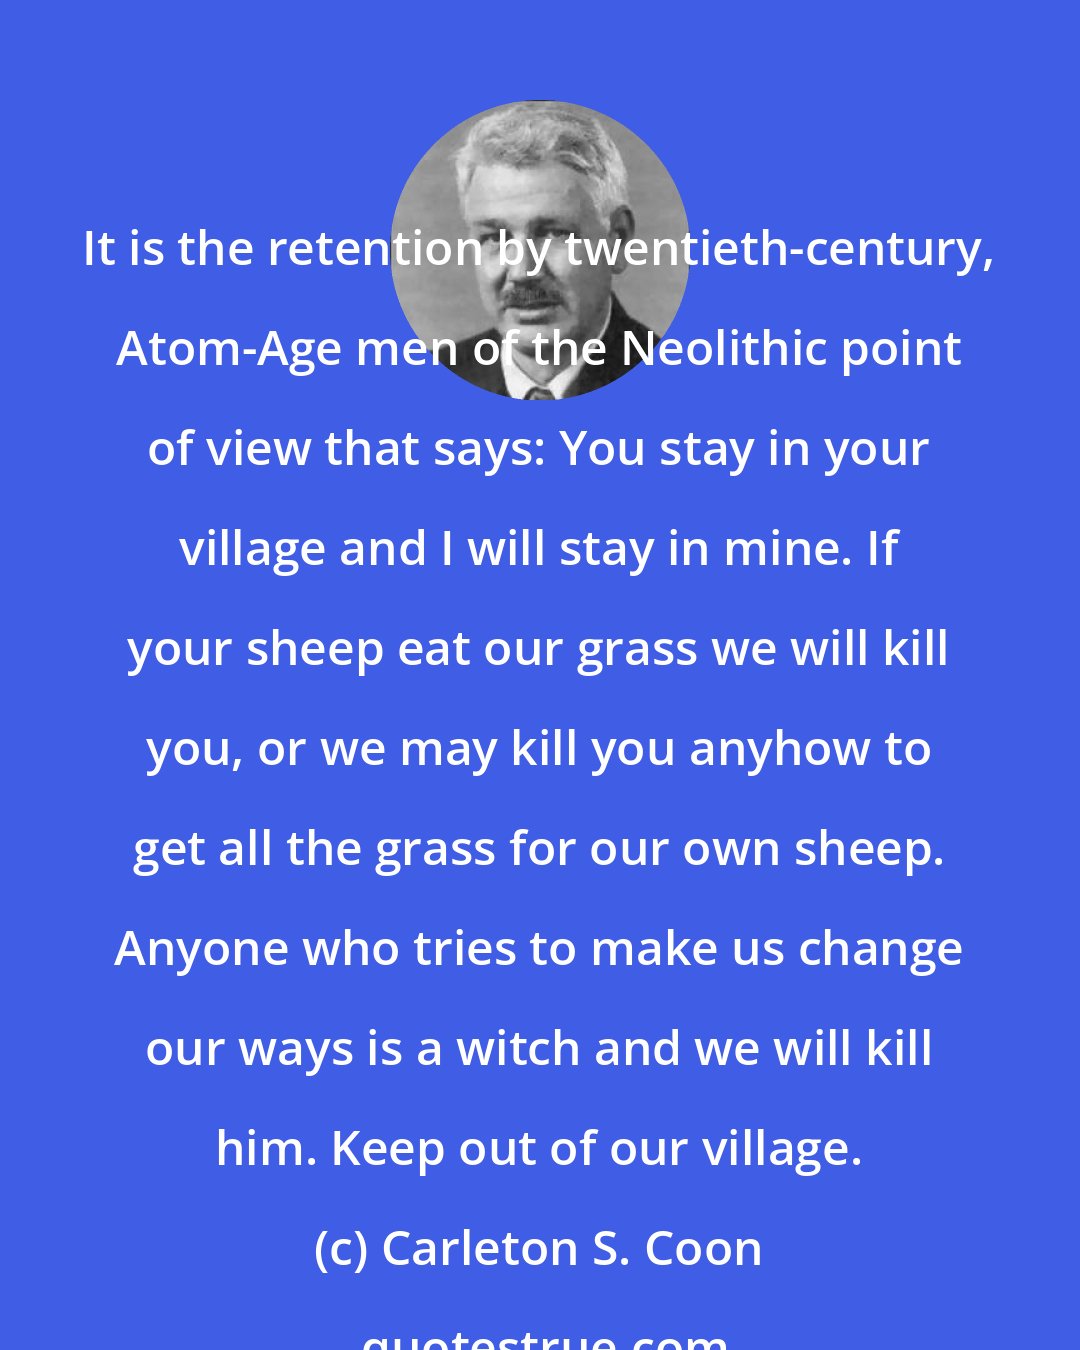 Carleton S. Coon: It is the retention by twentieth-century, Atom-Age men of the Neolithic point of view that says: You stay in your village and I will stay in mine. If your sheep eat our grass we will kill you, or we may kill you anyhow to get all the grass for our own sheep. Anyone who tries to make us change our ways is a witch and we will kill him. Keep out of our village.